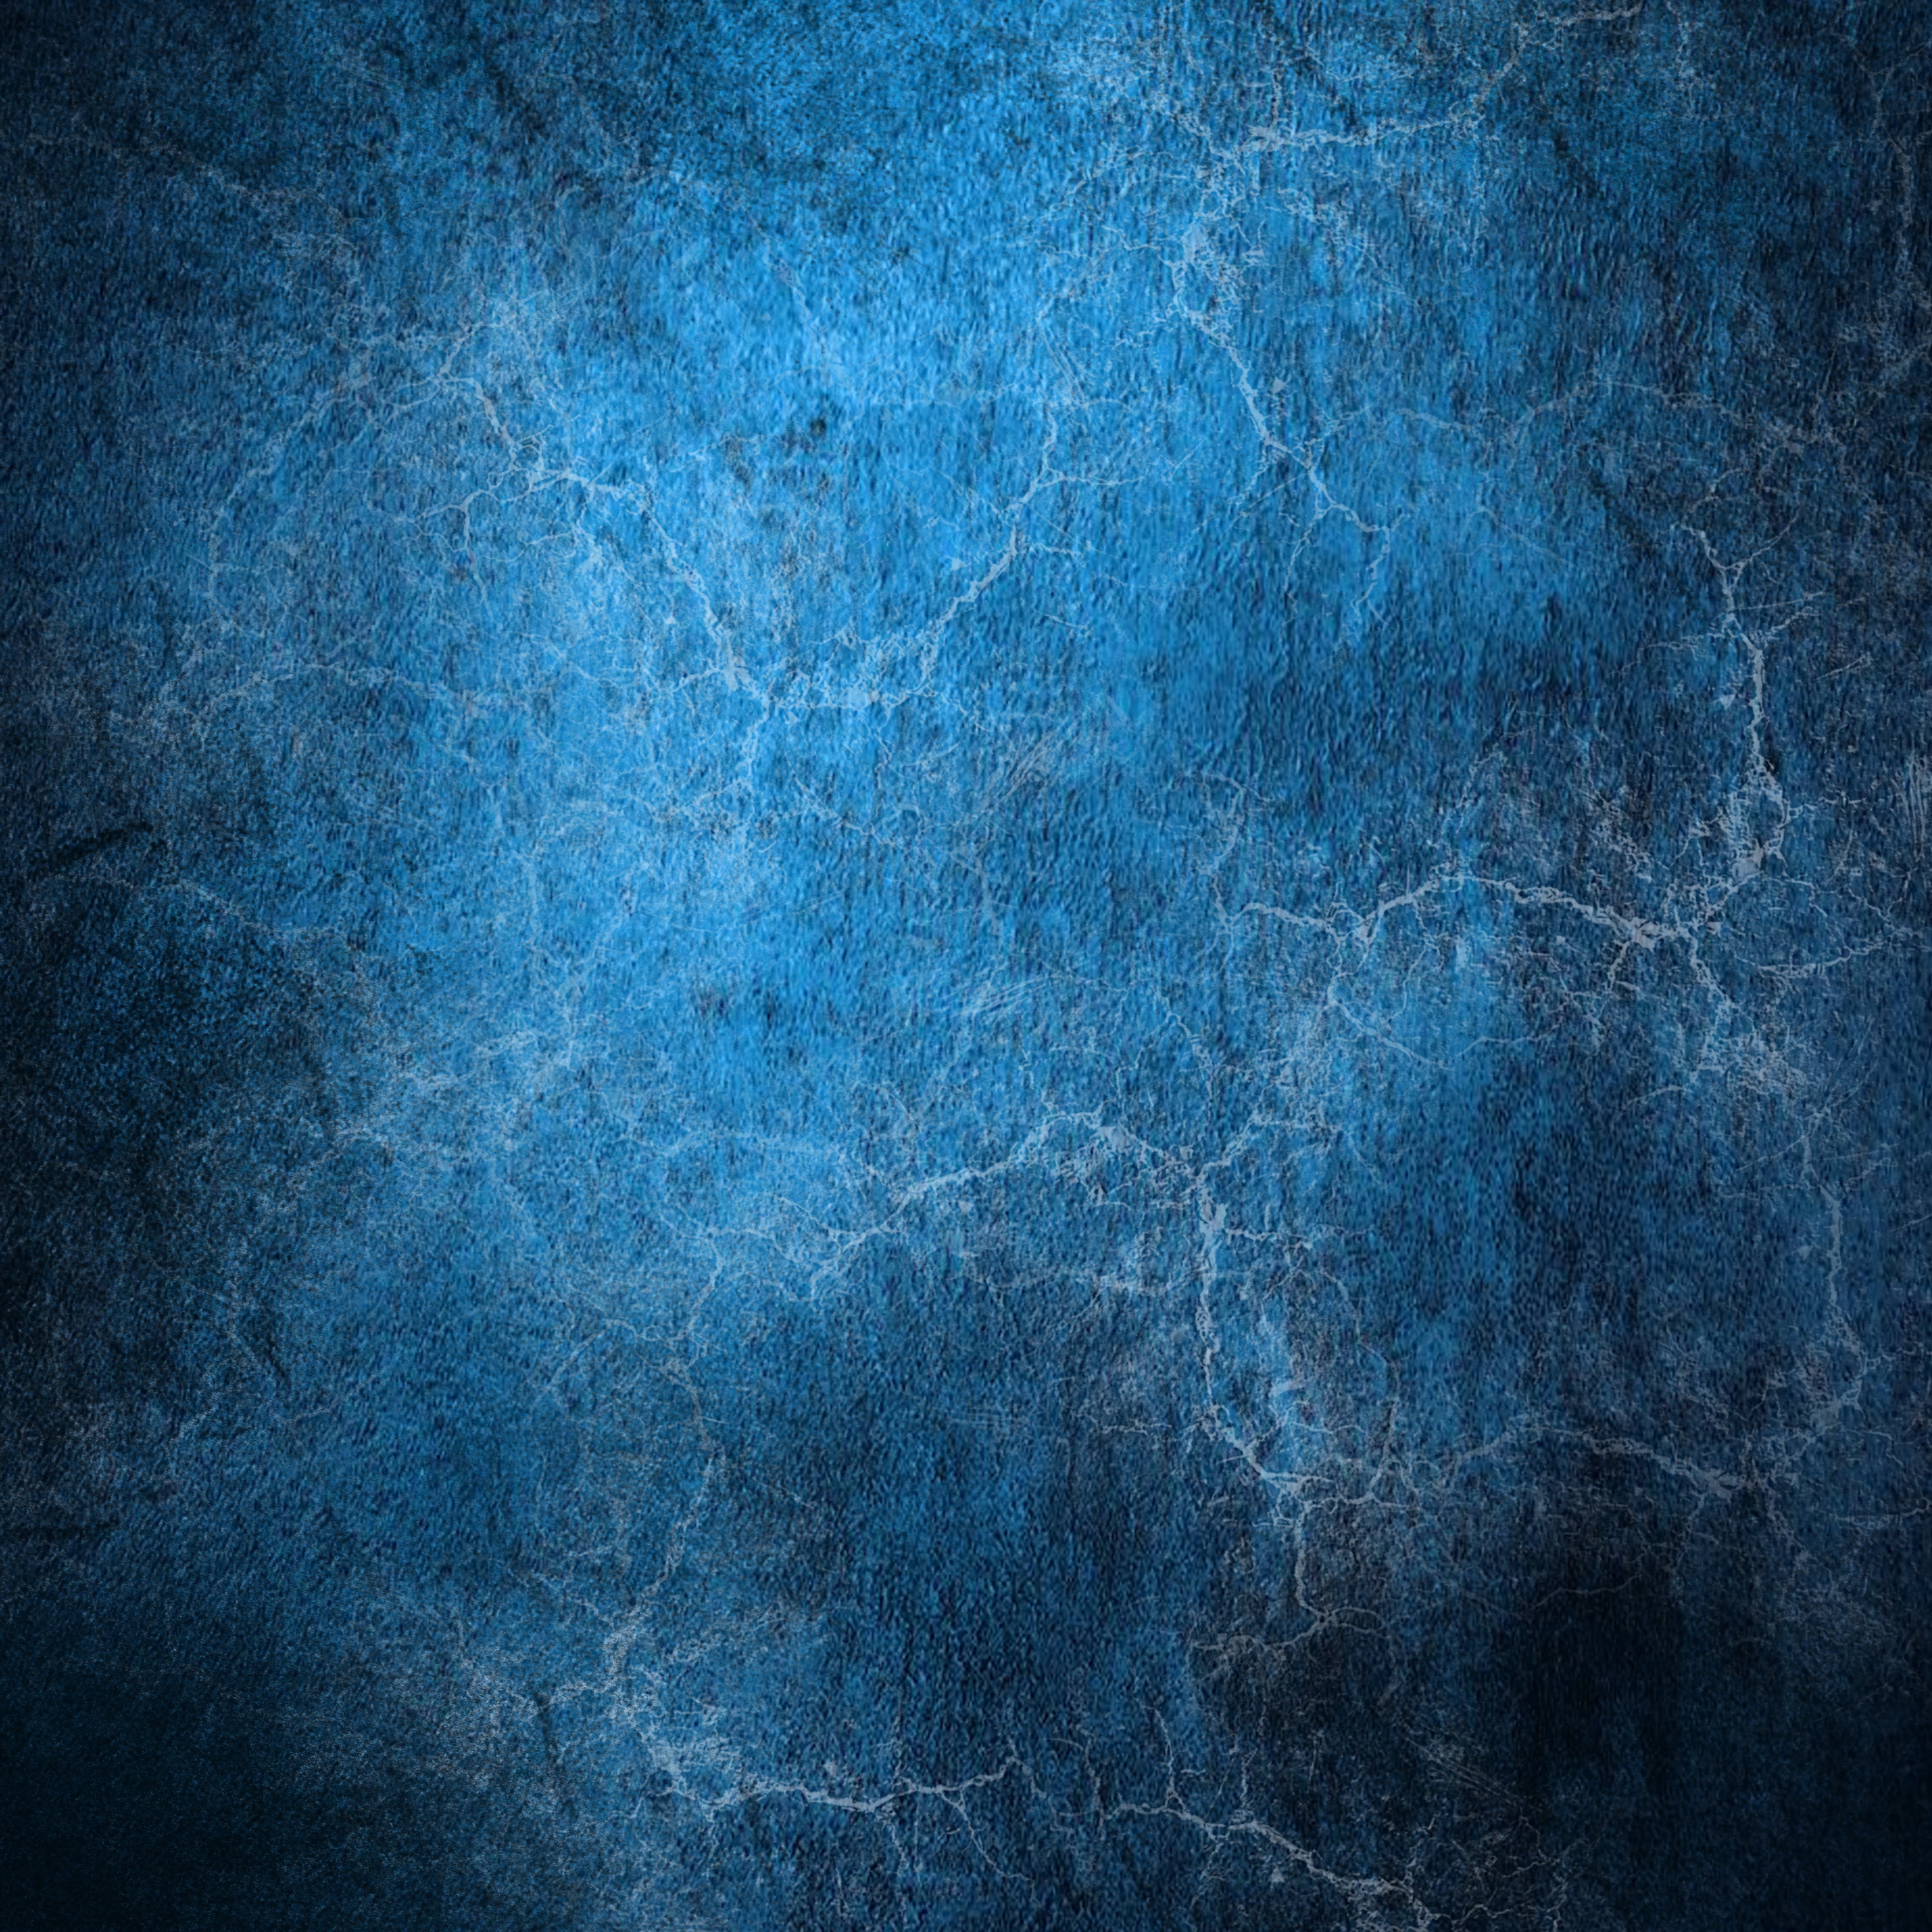 grunge, vintage, textures, blue Square Wallpapers